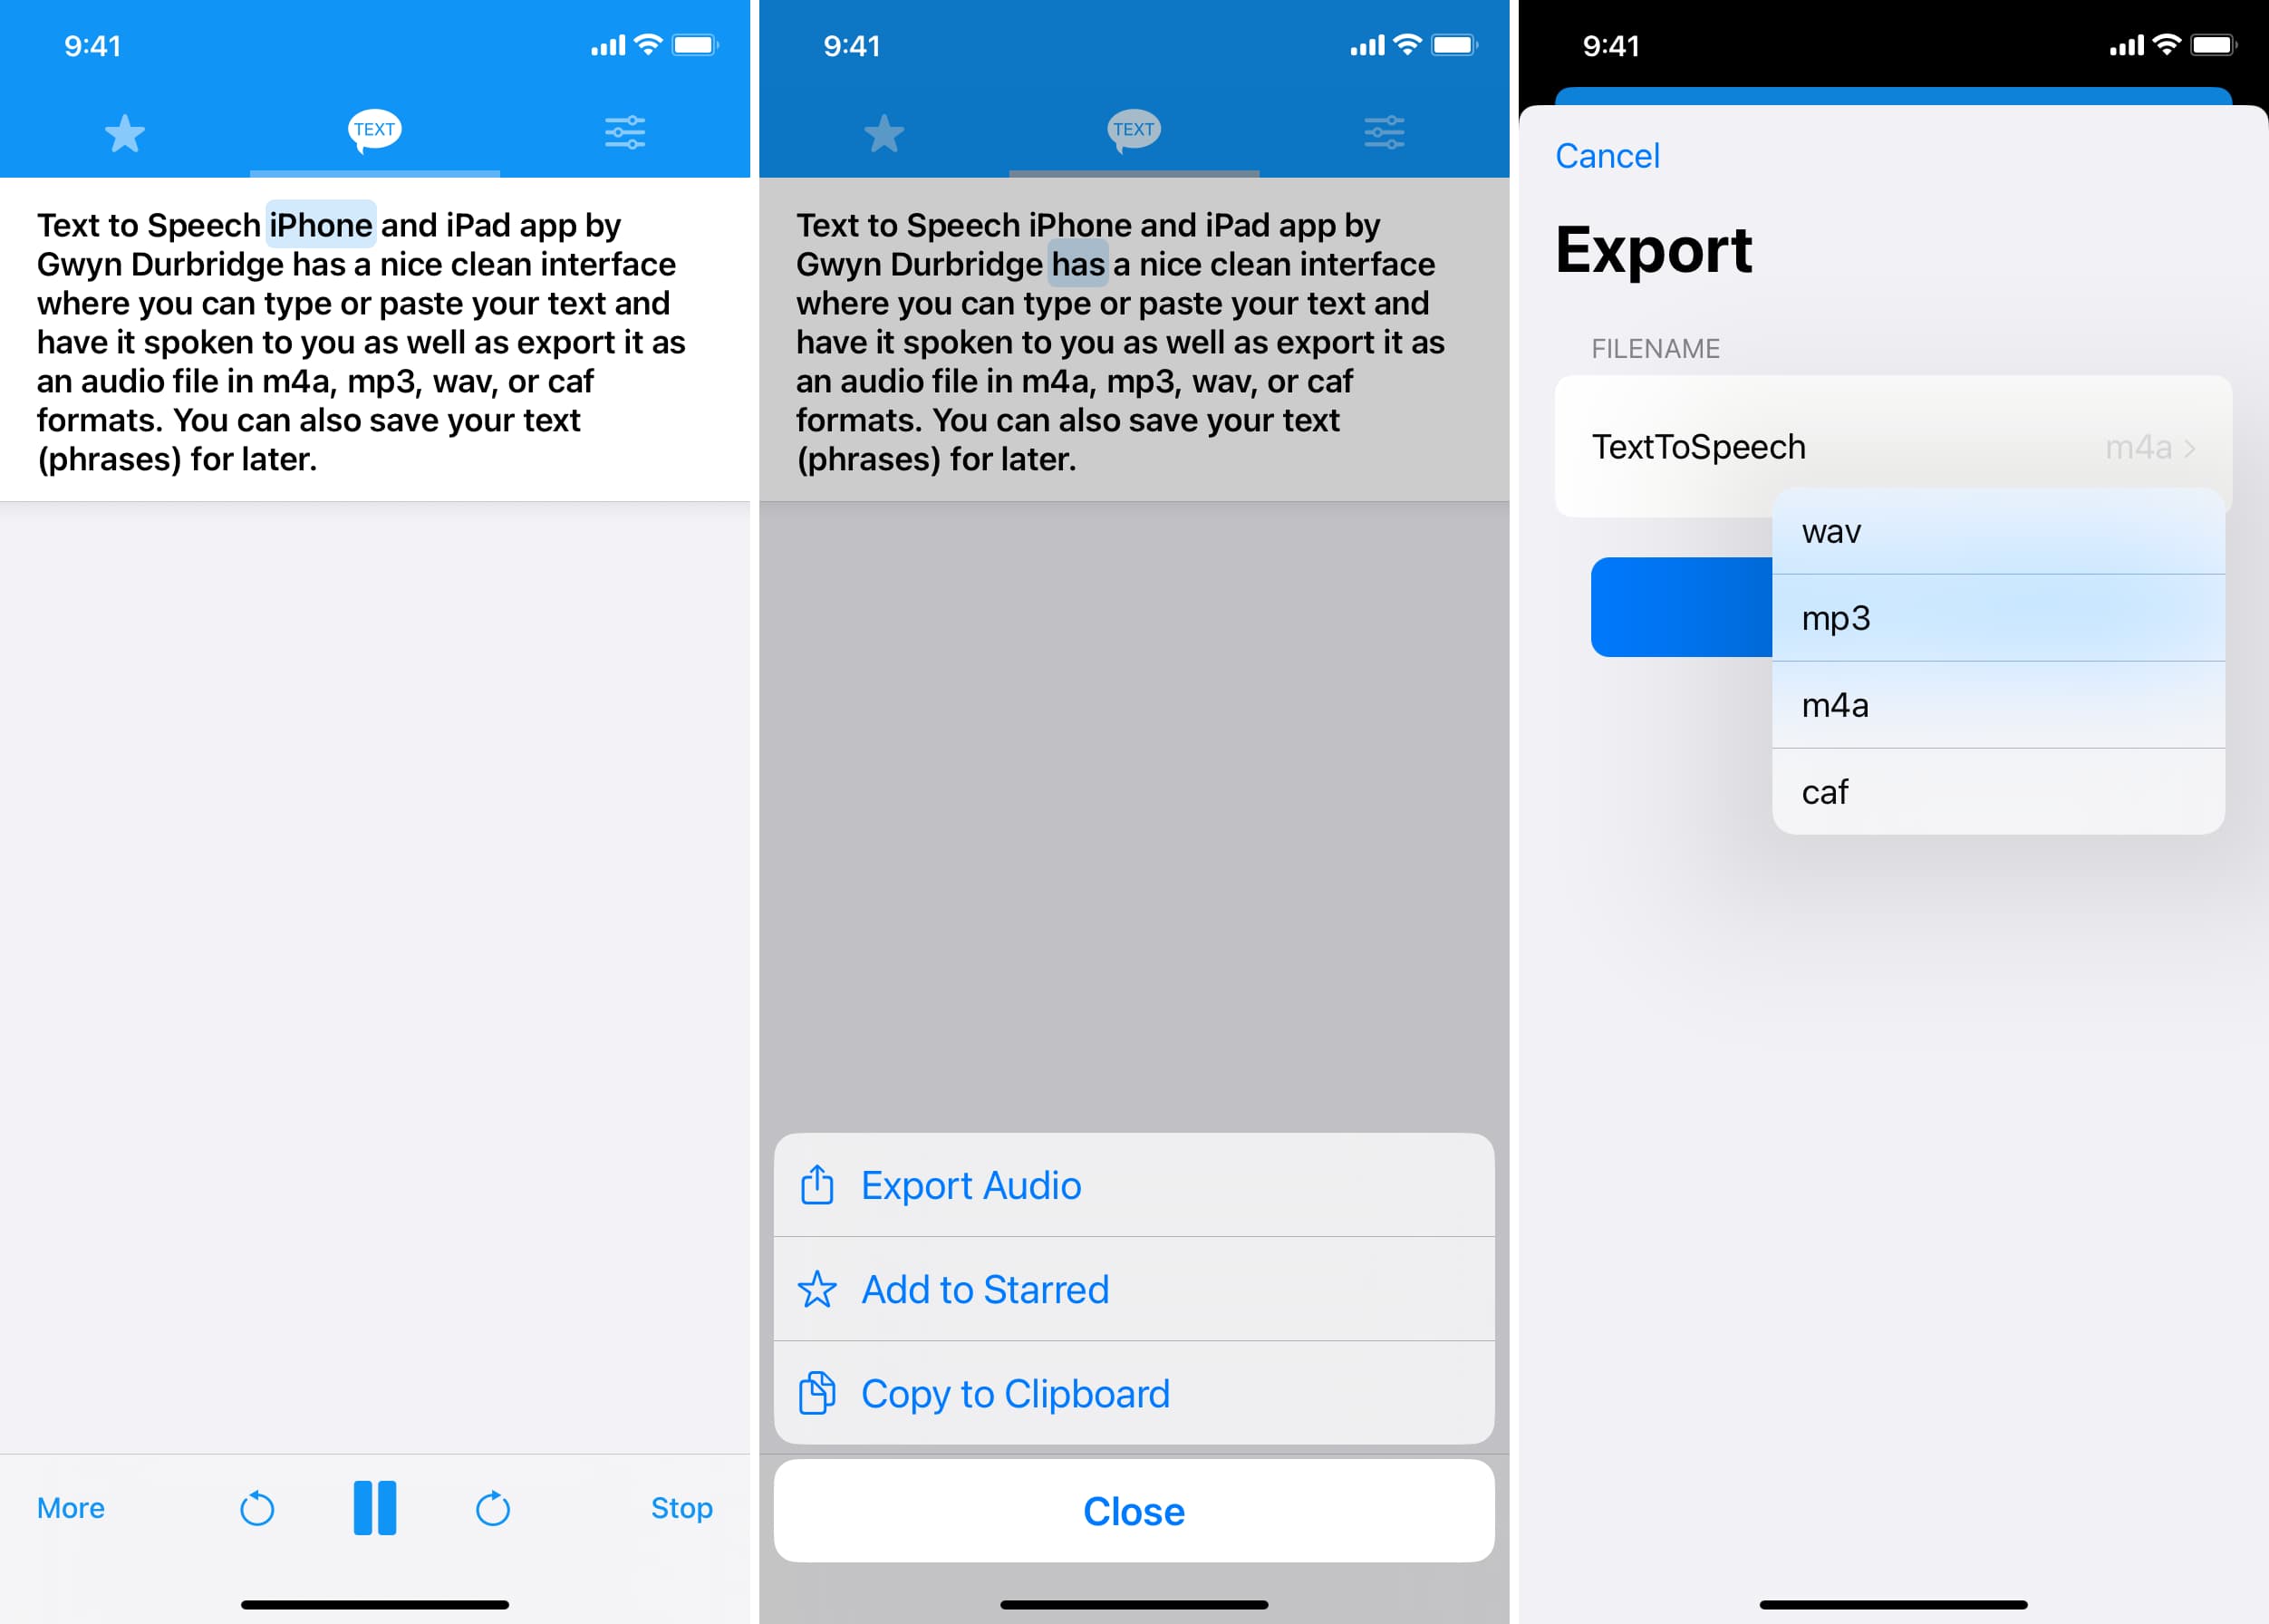 Text to Speech app on iPhone to listen to custom text and export its audio file